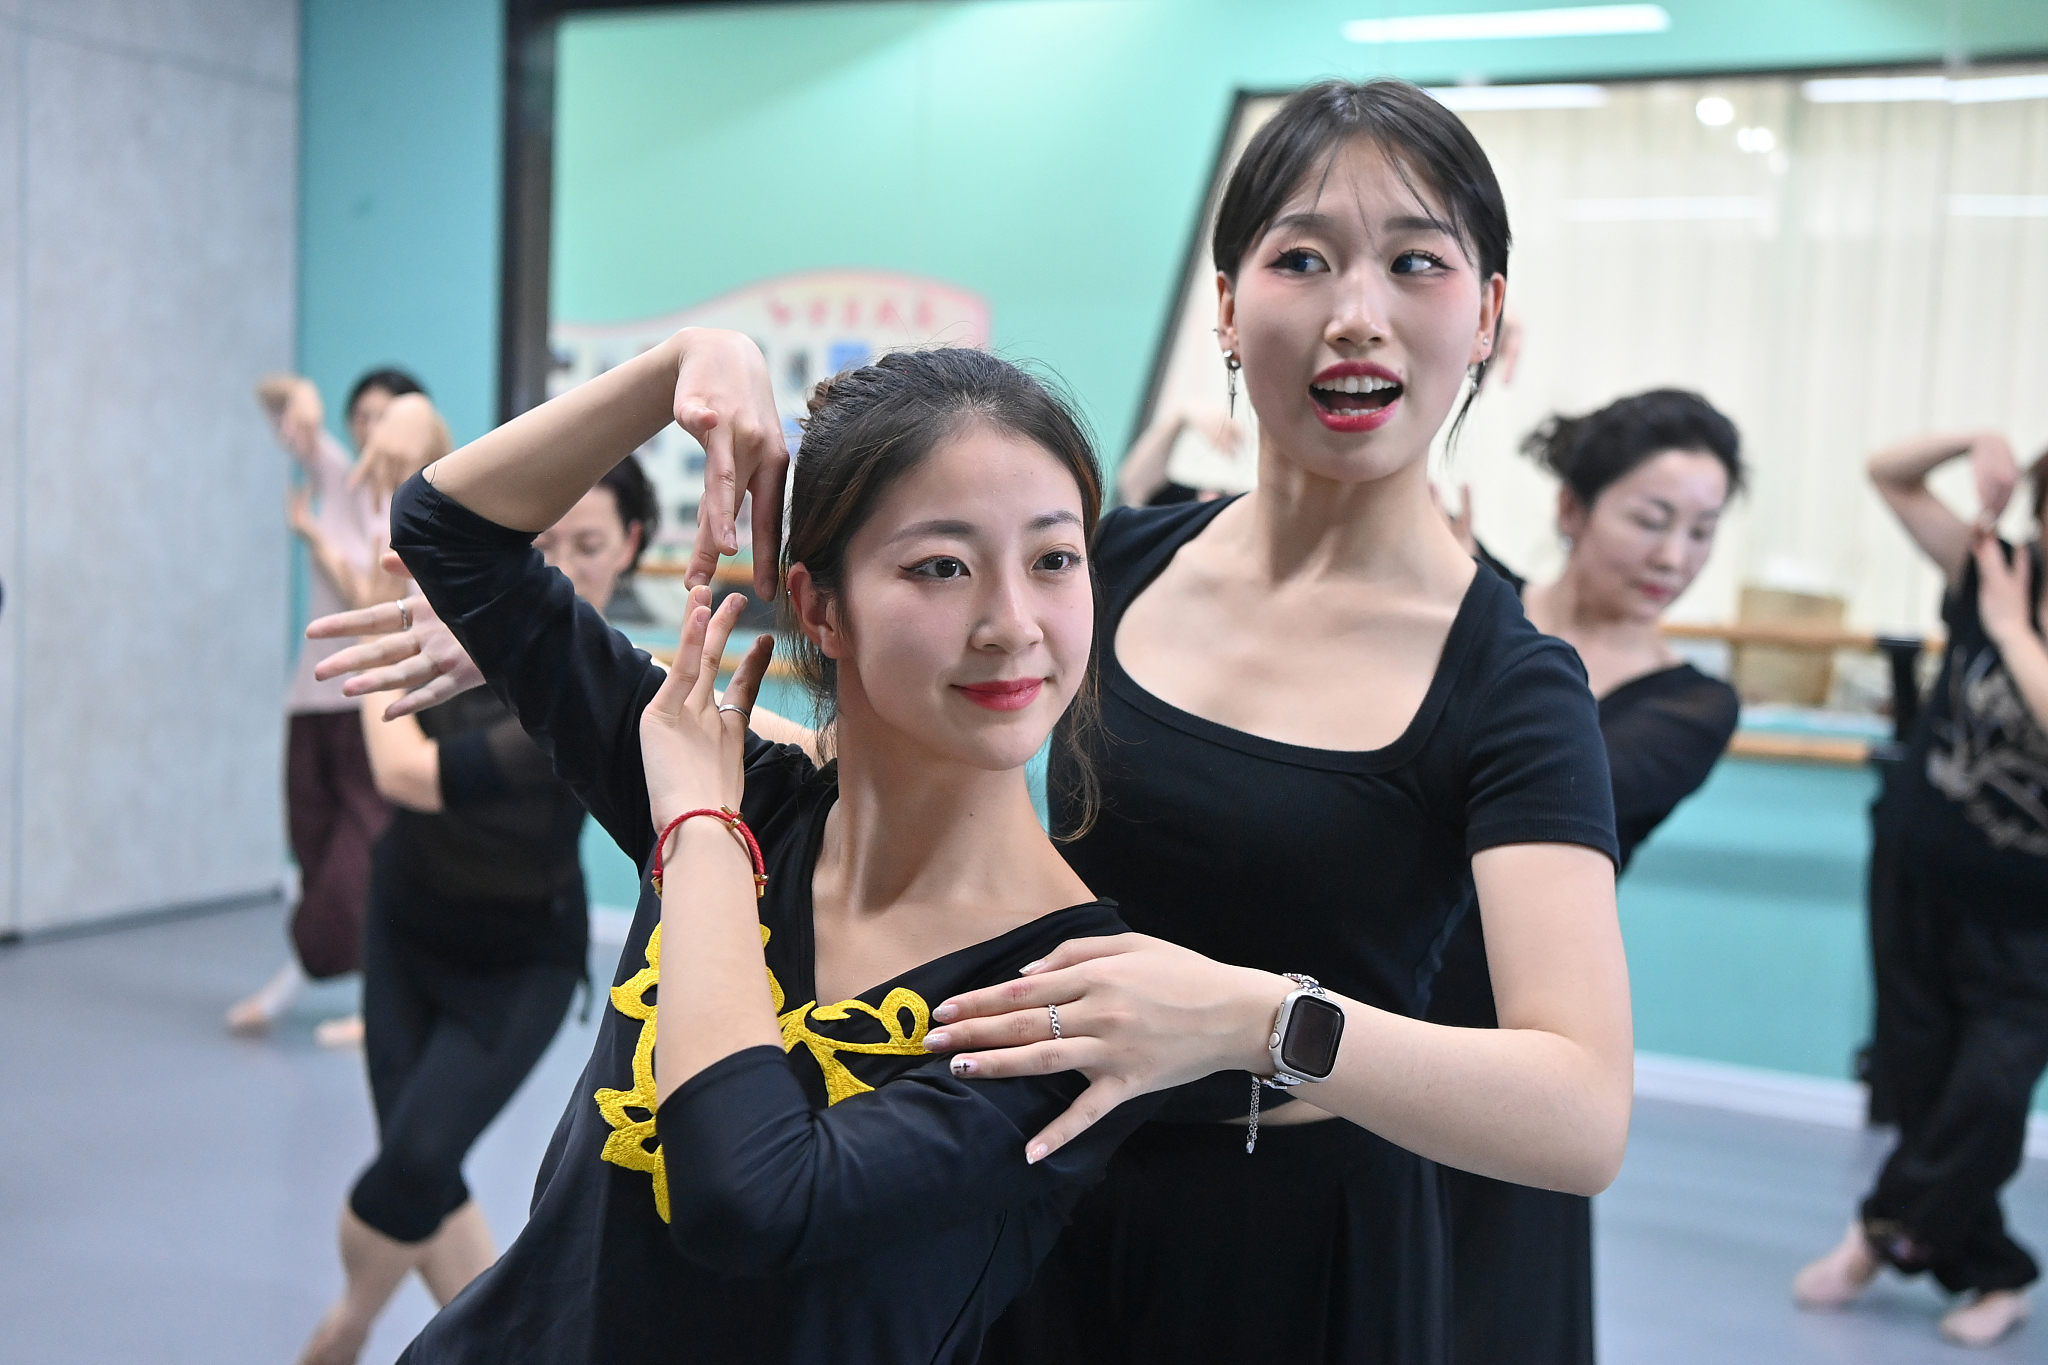 A file photo shows students attending a night school course being taught folk dance in Lanzhou, Gansu Province. /CFP